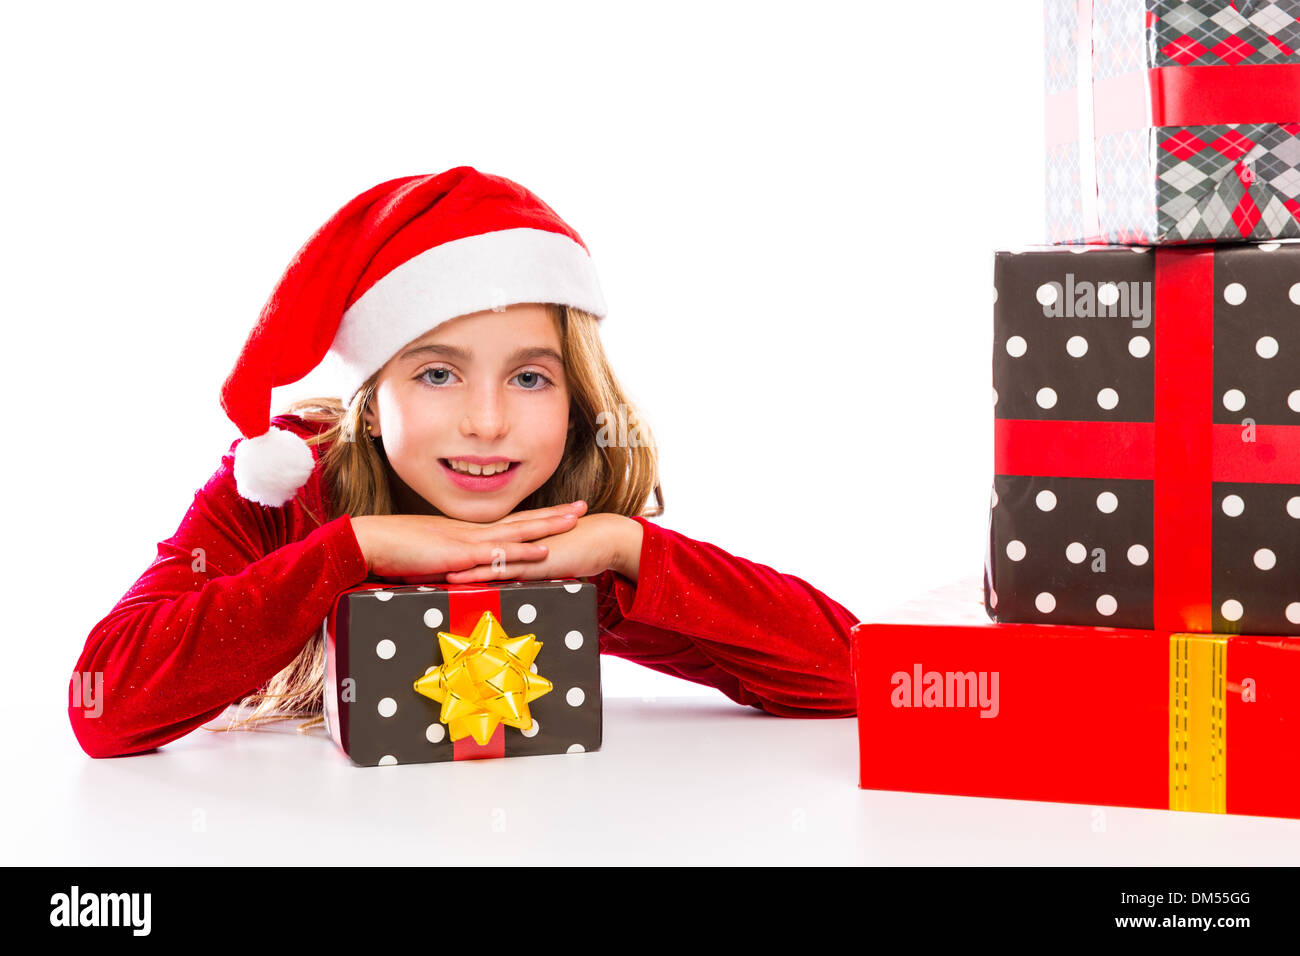 Christmas Santa kid girl happy excited with ribbon gifts isolated on white background Stock Photo